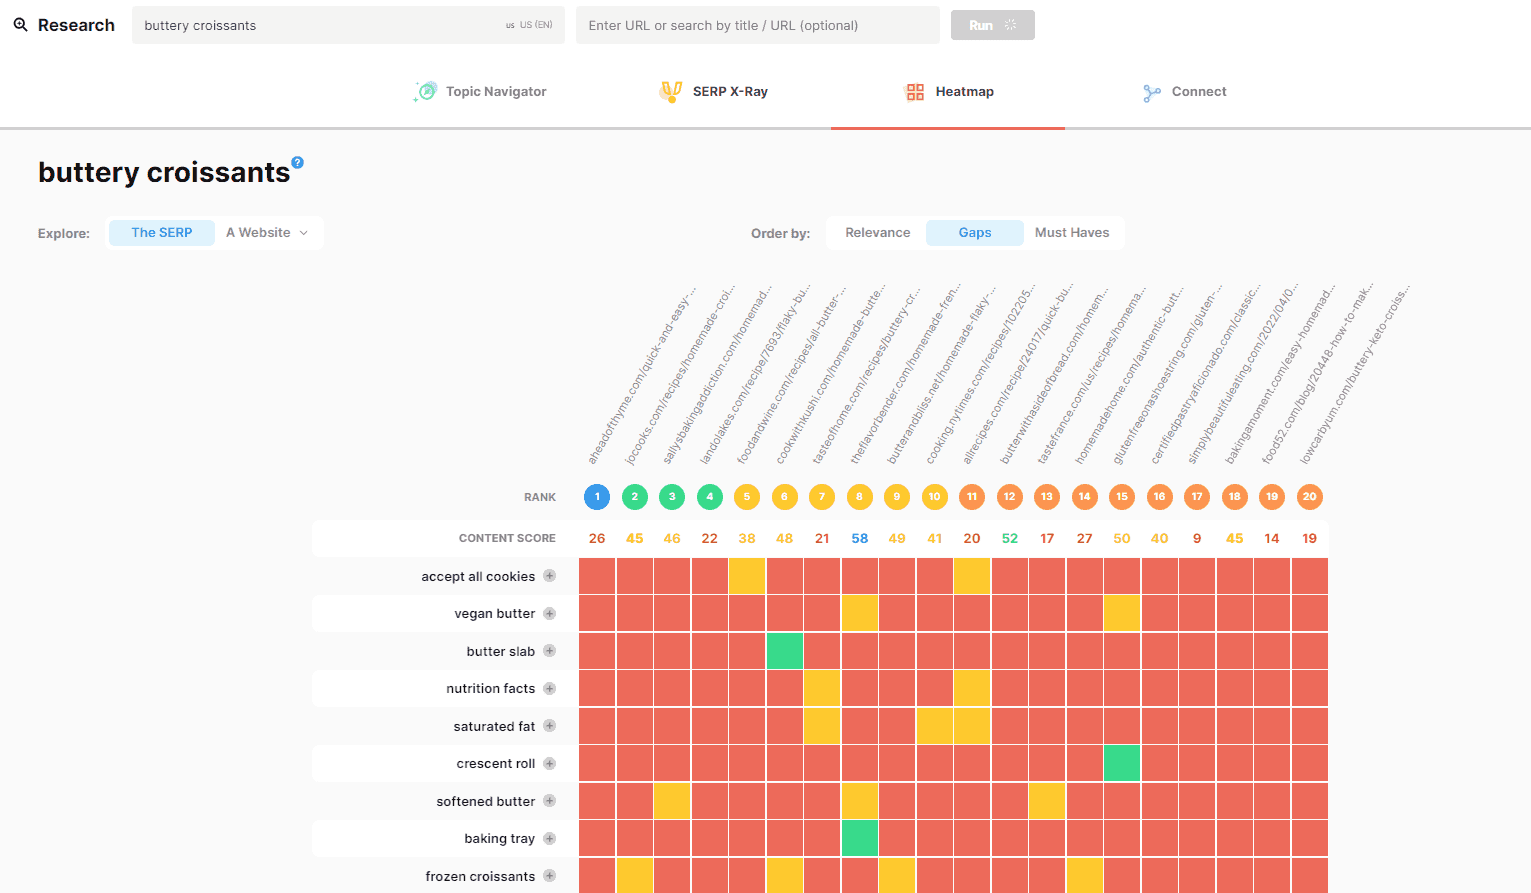 "Heatmap" report for "،ery croissants" in MarketMuse